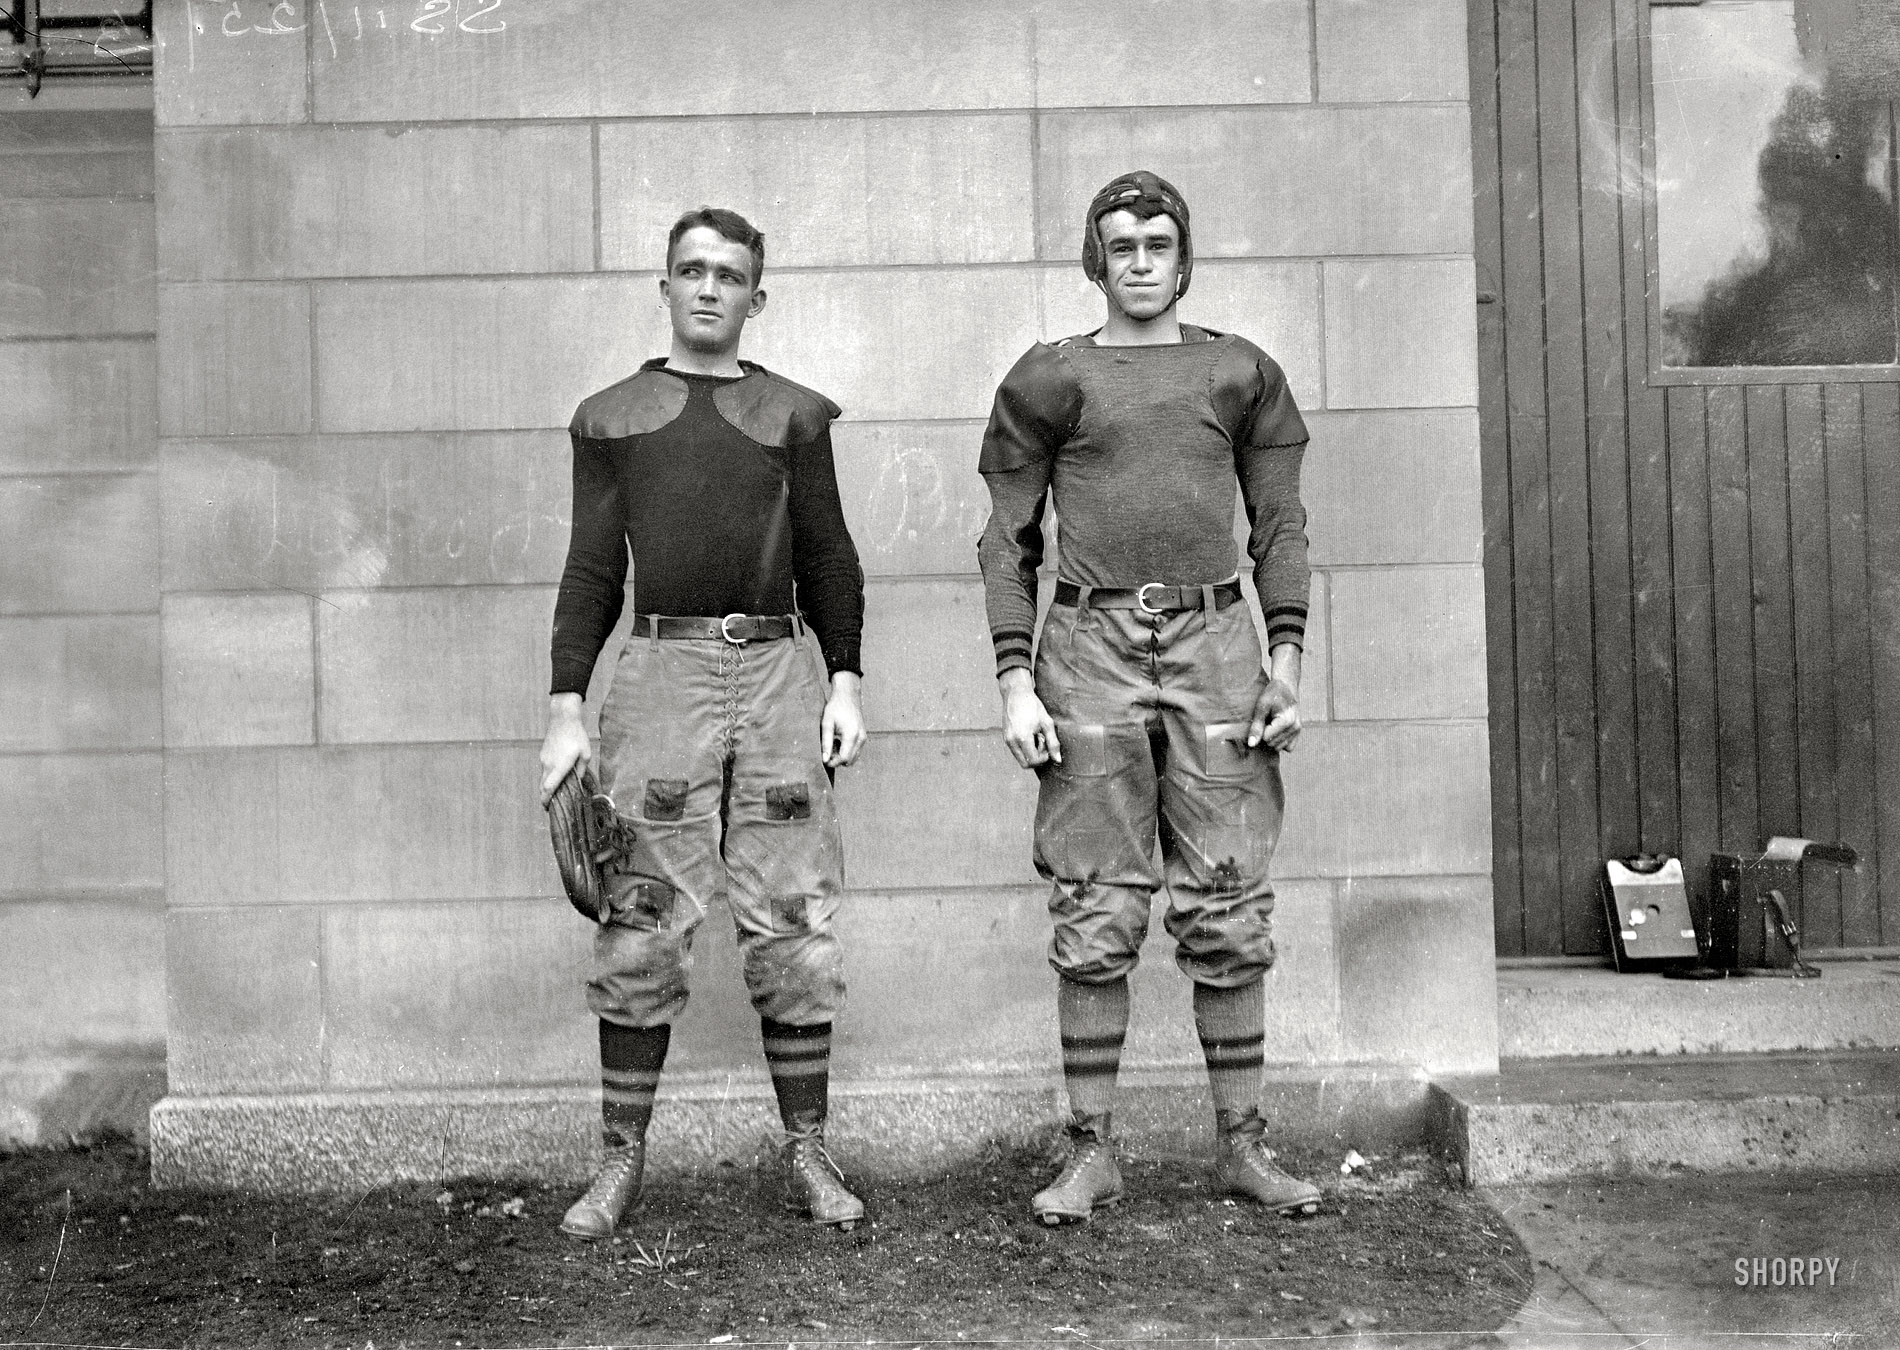 New York, November 25, 1913. "Mullins & Sullivan." West Point football players Charles Love Mullins Jr. and Joseph Pescia Sullivan, future major generals from the Class of 1917. 5x7 glass negative, Bain News Service. View full size.